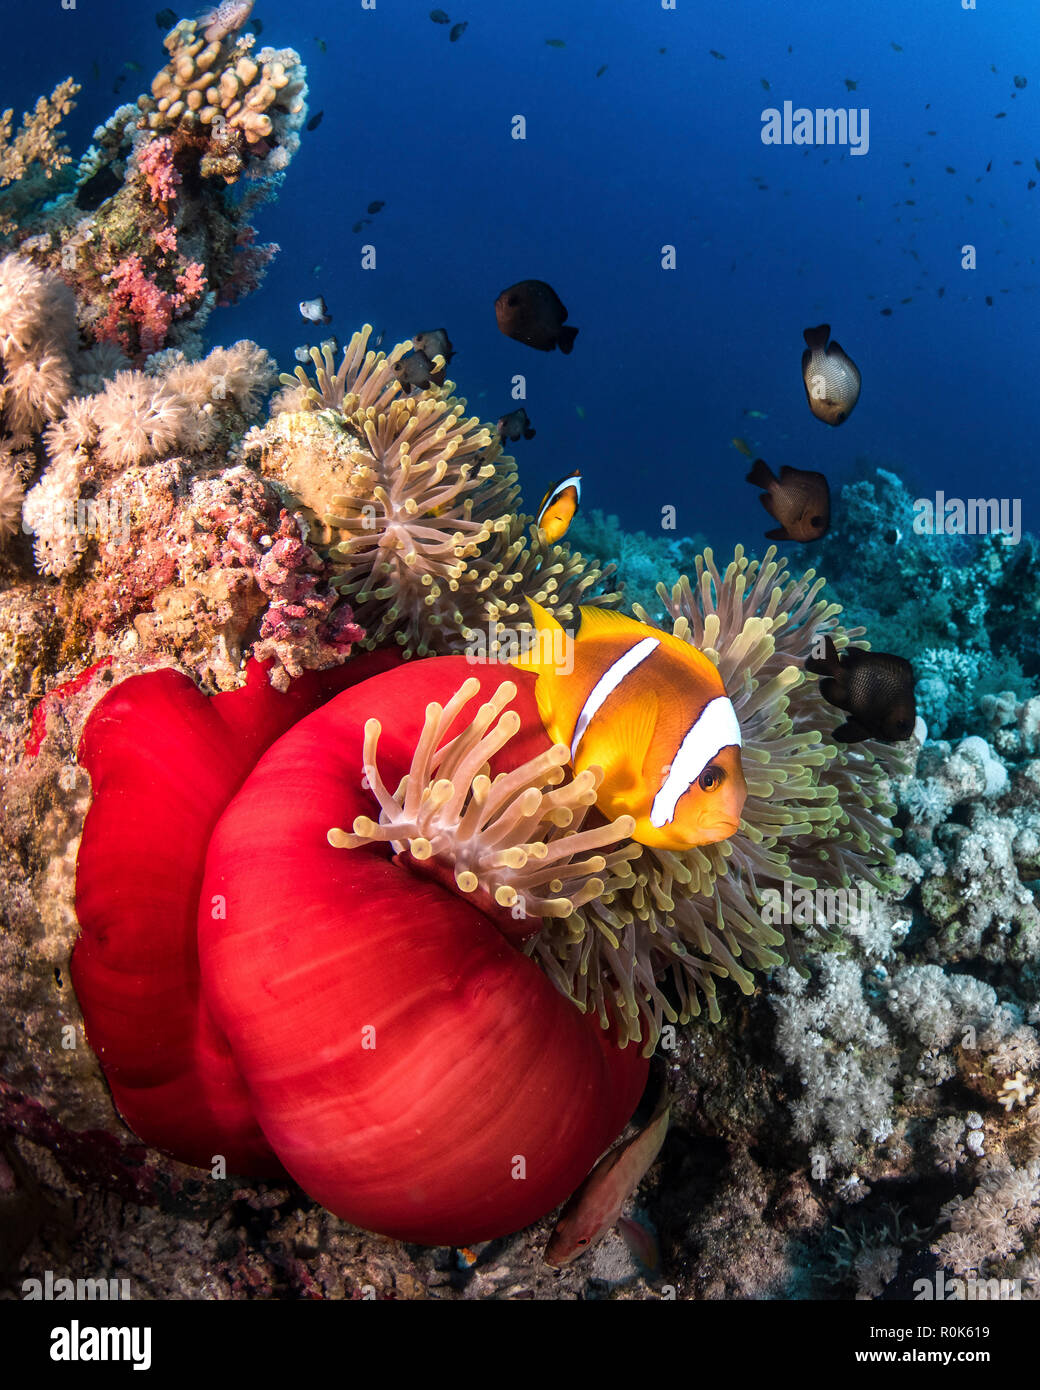 The anemones in the Red Sea have beautiful Red Skirts. Stock Photo